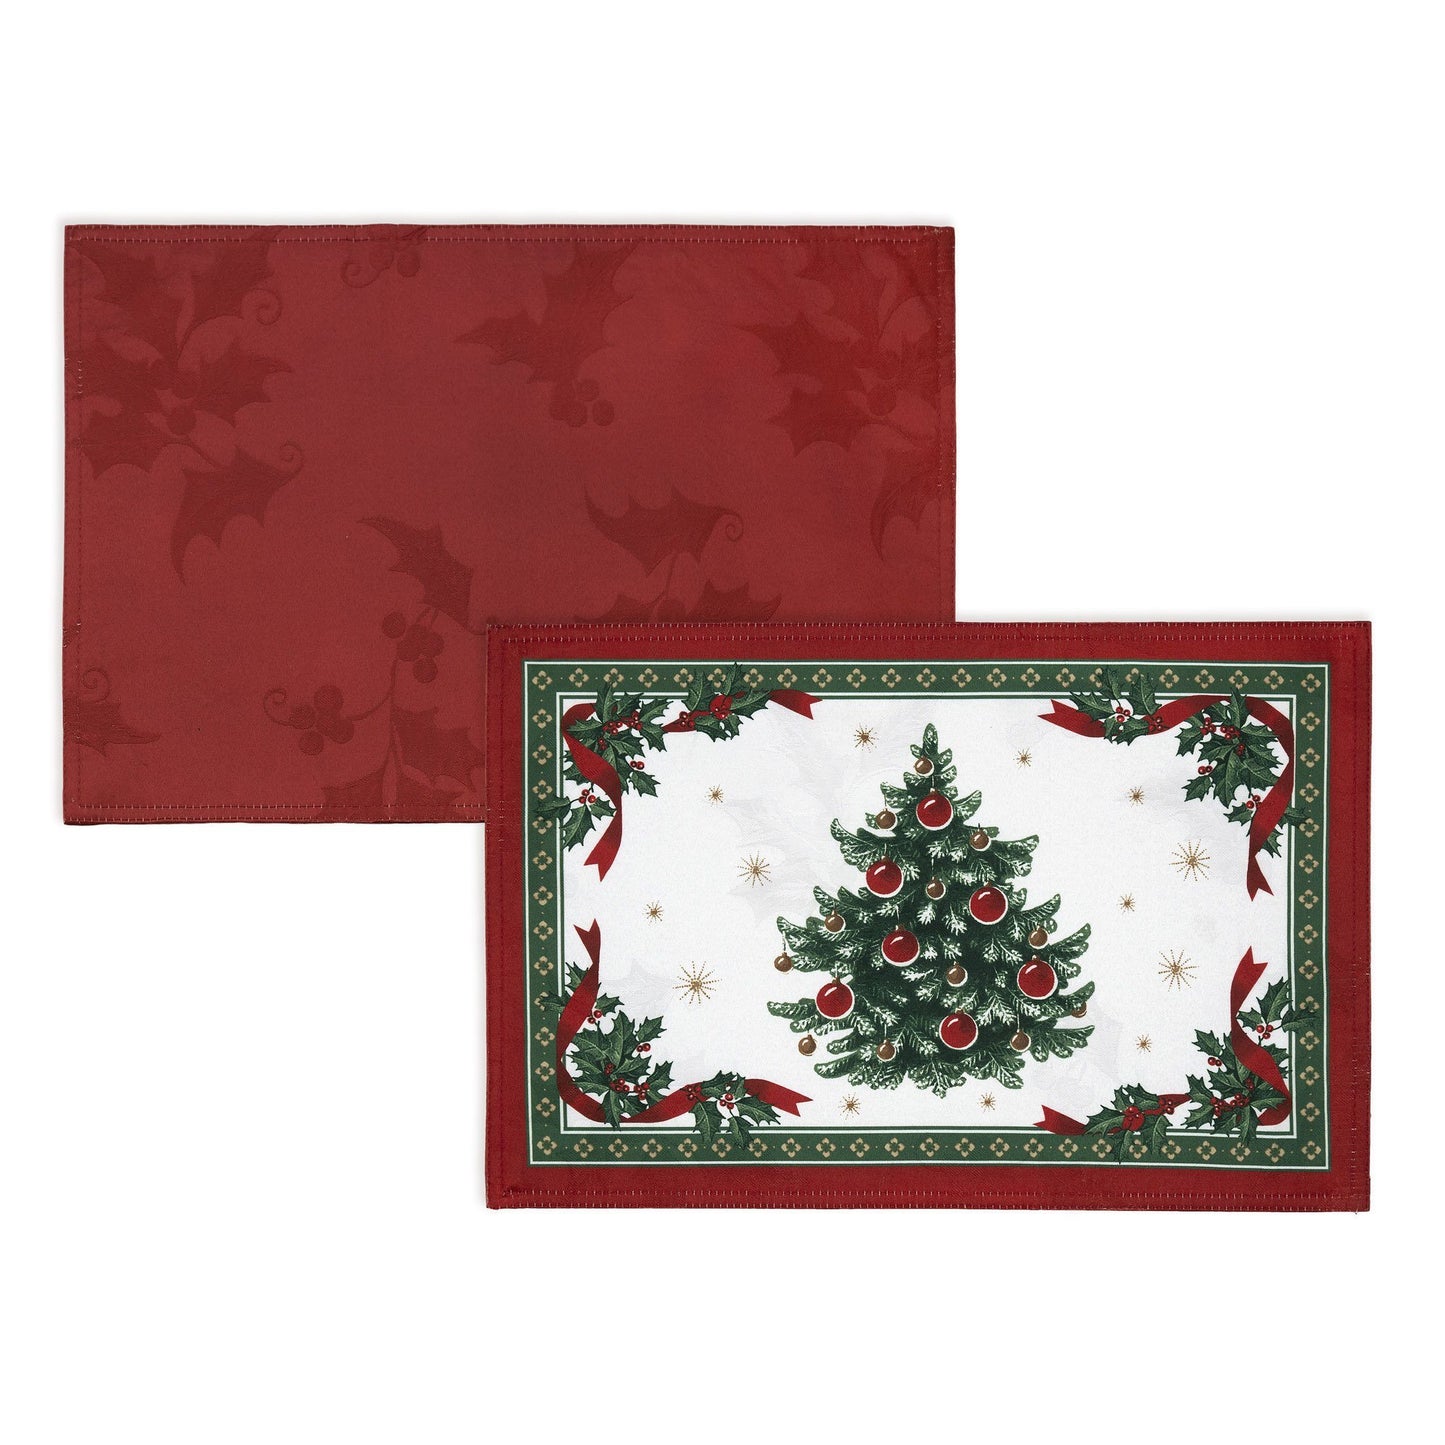 Set of 4 placemats with a white holly damask design on background, a christmas tree in the center and a holly and red ribbon border. The backside is also reversible with a solid red color and holly damask design